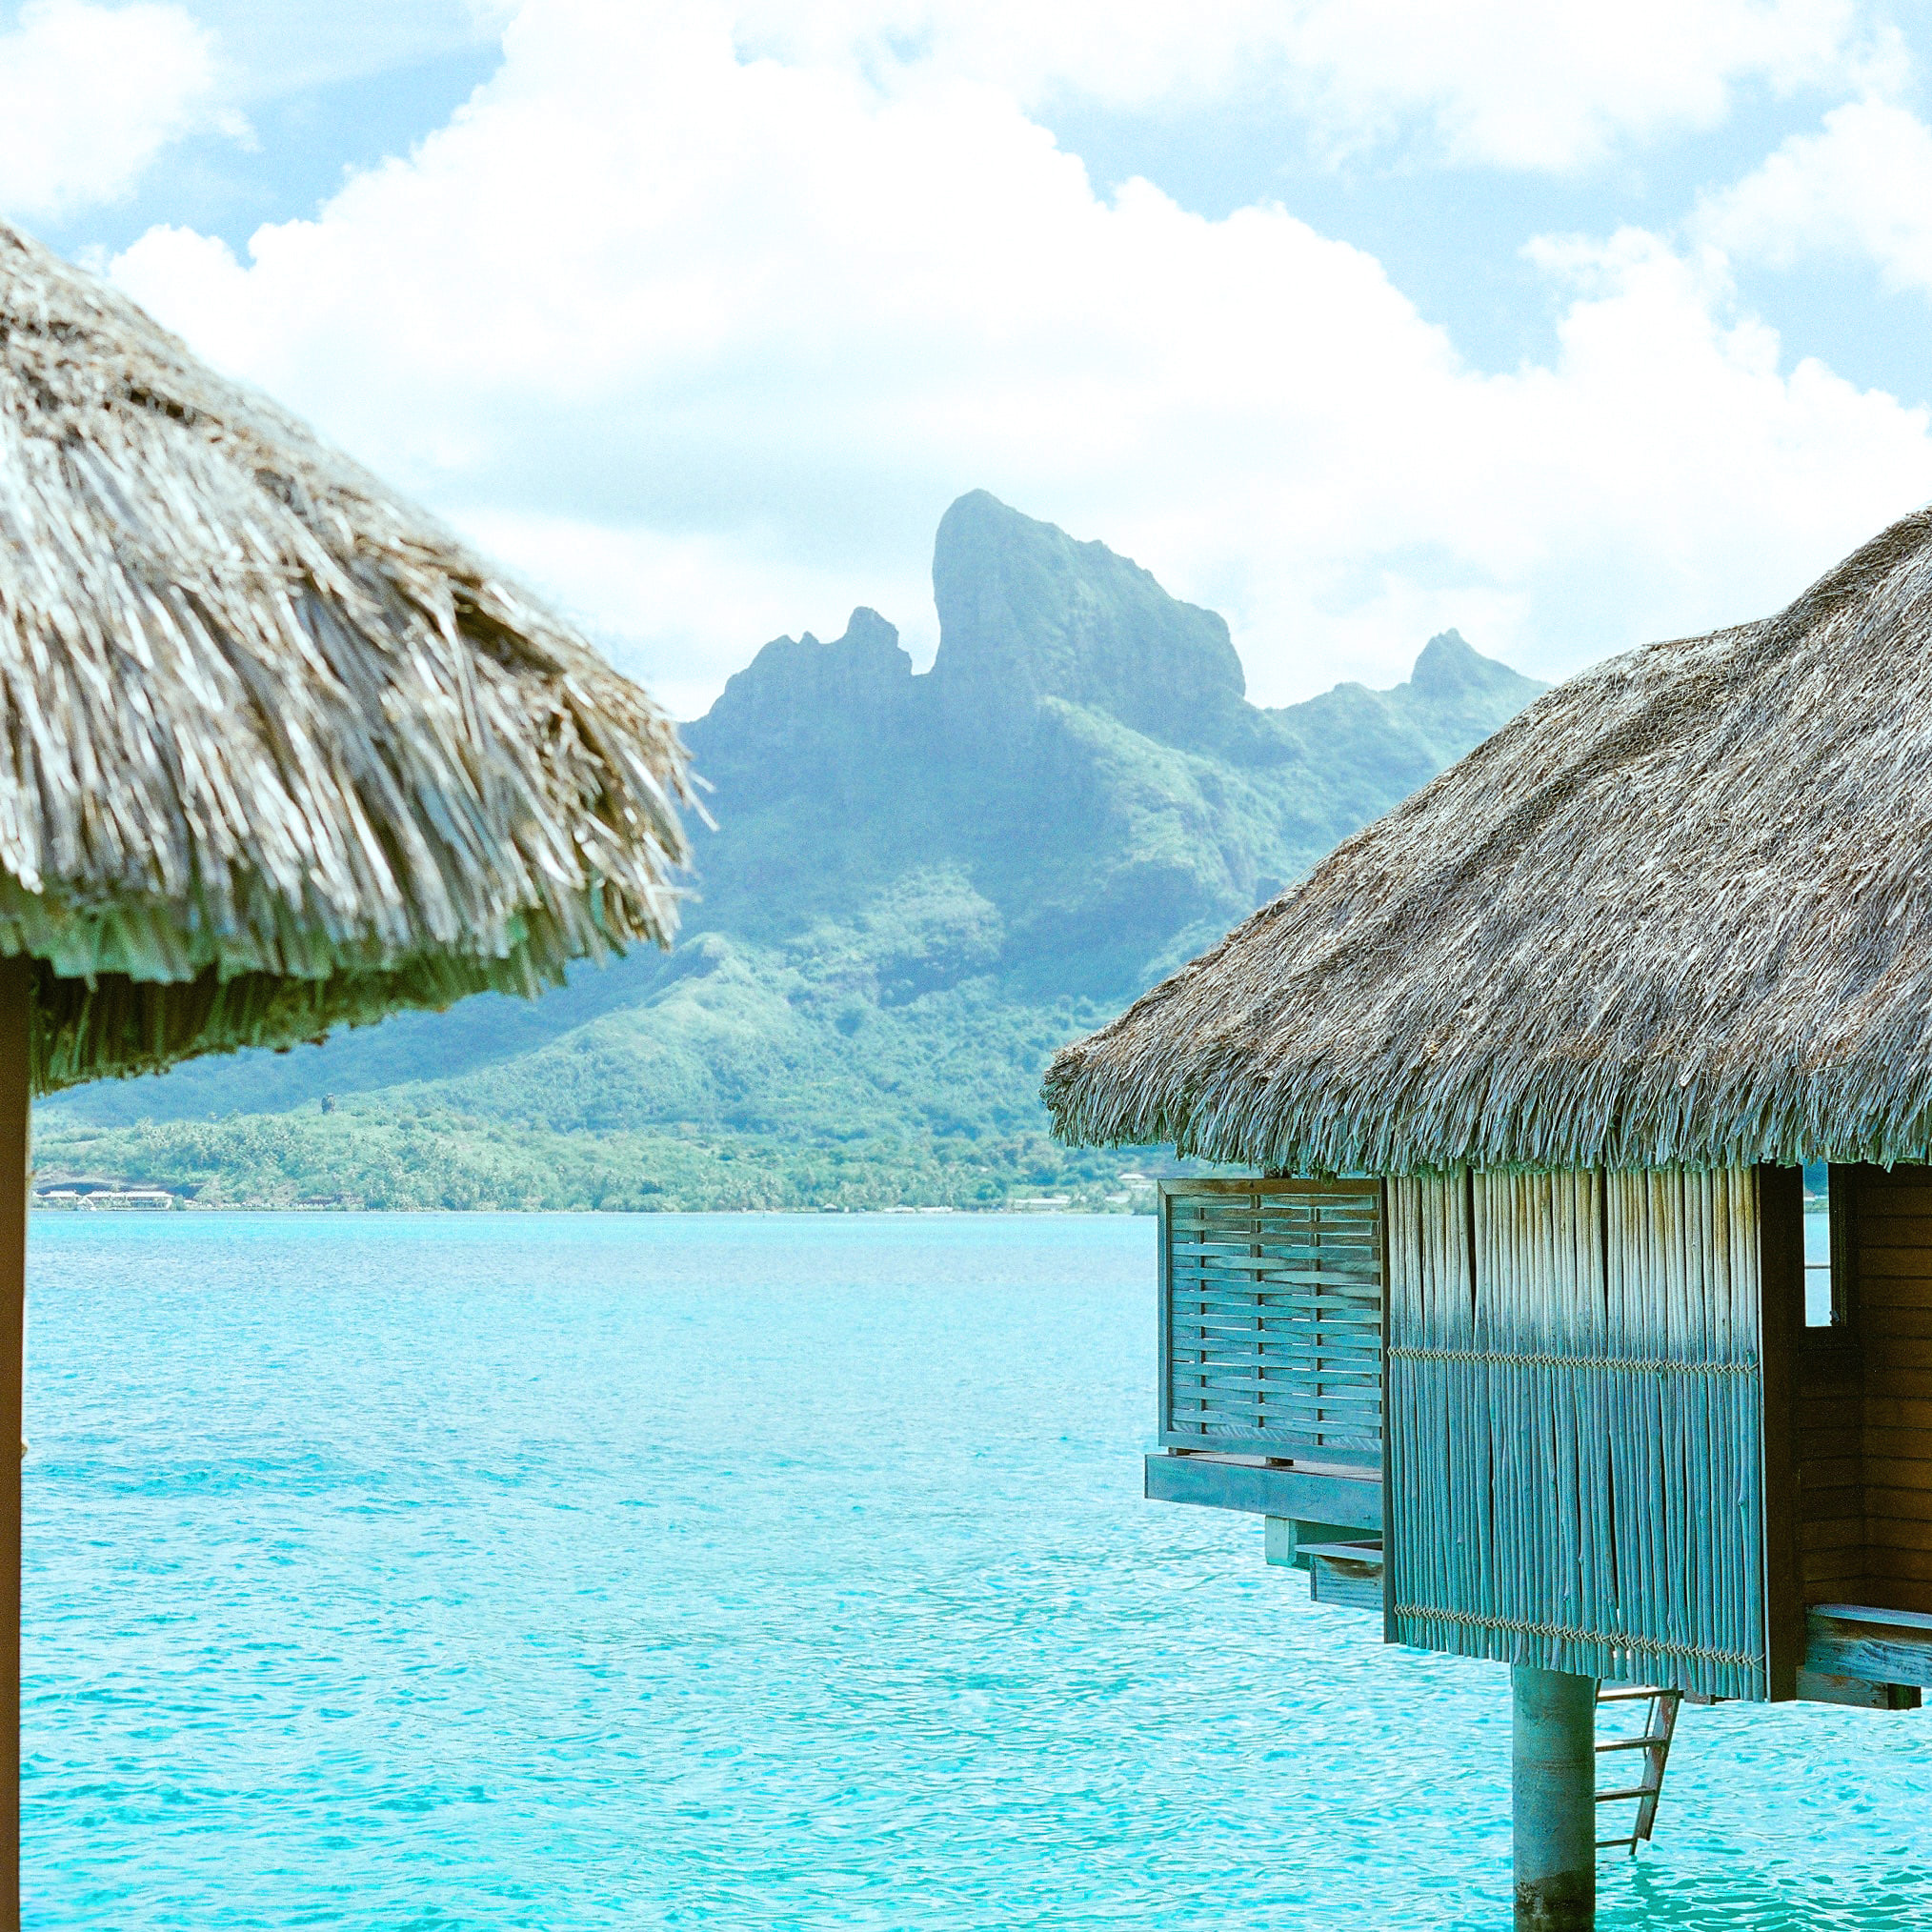 Luxury overwater bungalow hotels at Tahiti resort in Bora Bora, French Polynesia travel with the beach and mountains in the background.